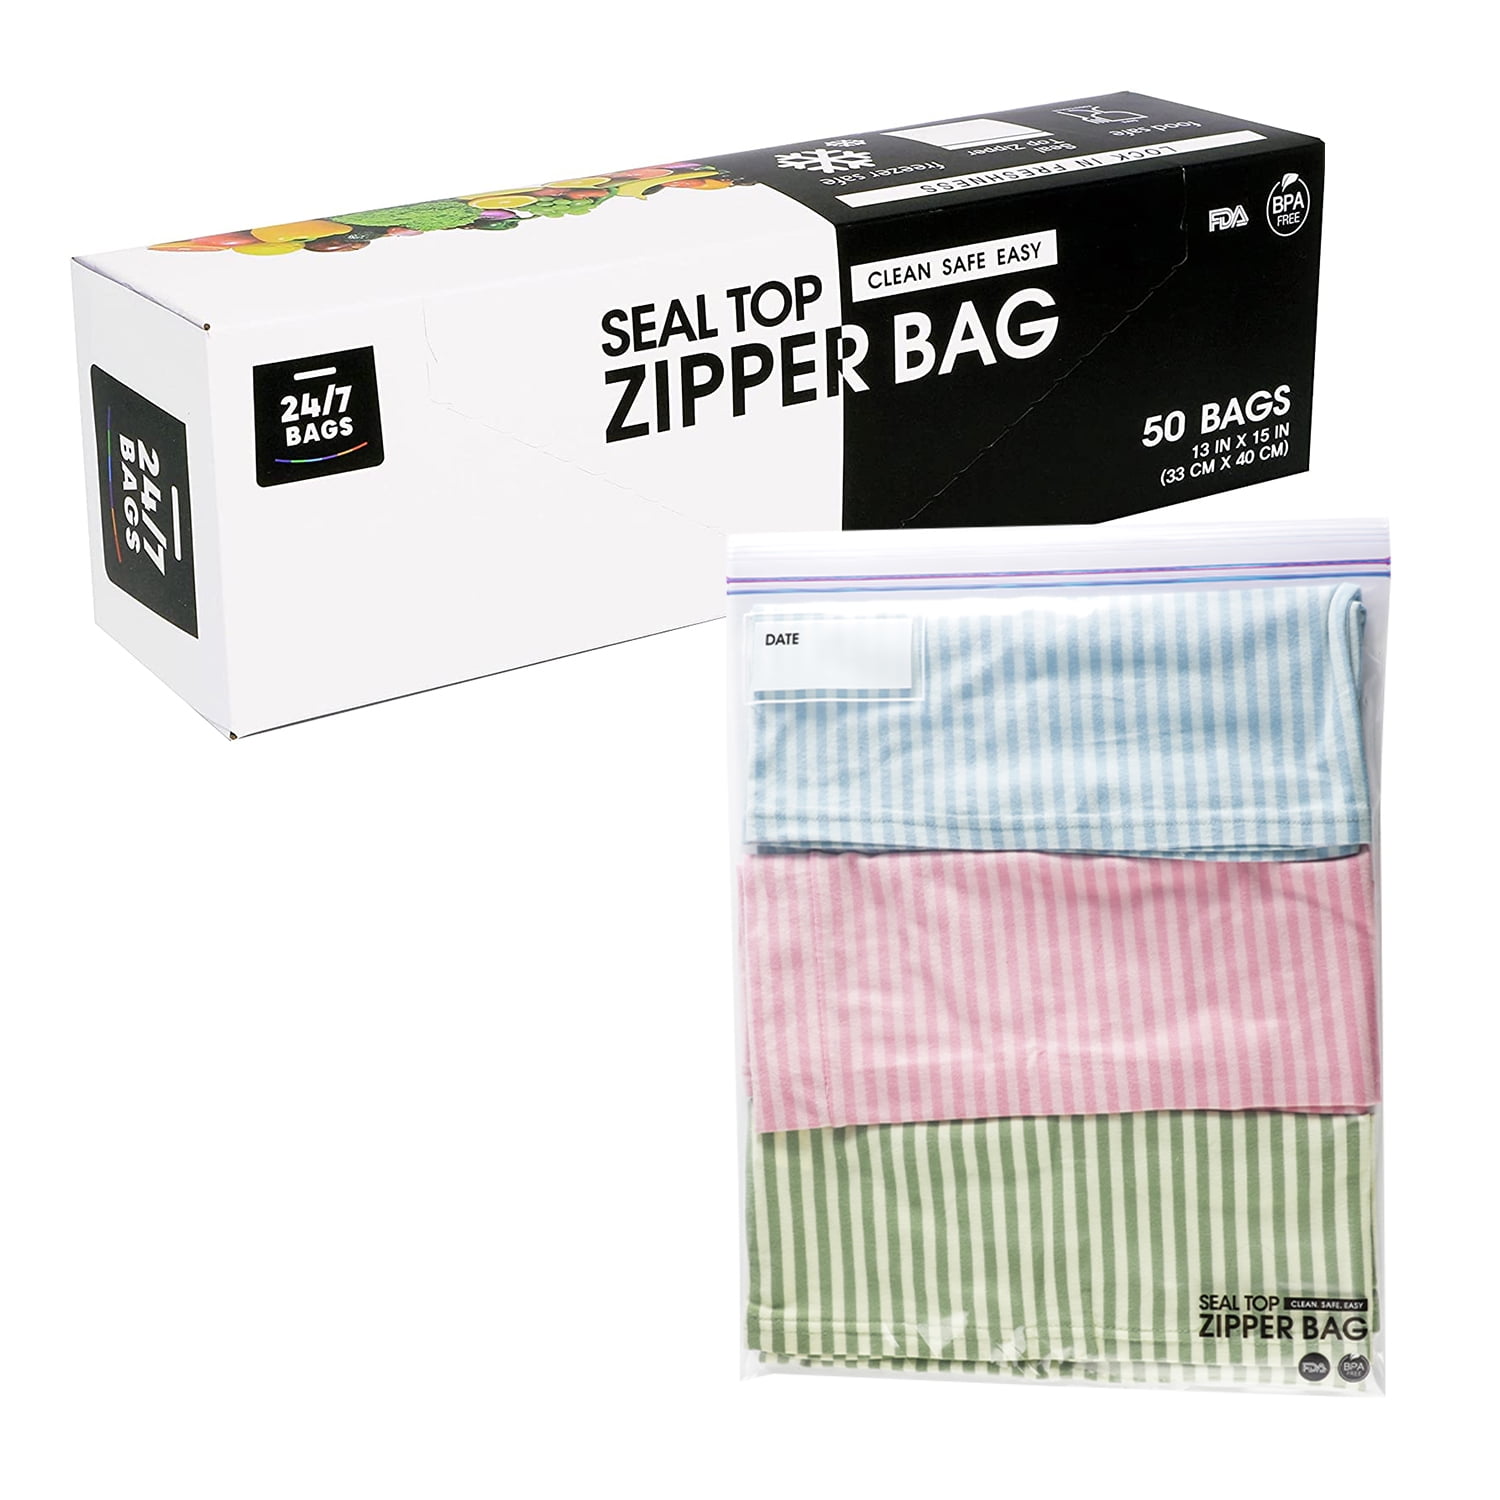 24/7 Bags- Large Double Zipper Bags, 3 Gallons, 12 Count, Stand And Fill,  Carry Handle, BPA-Free, Air Tight Seal